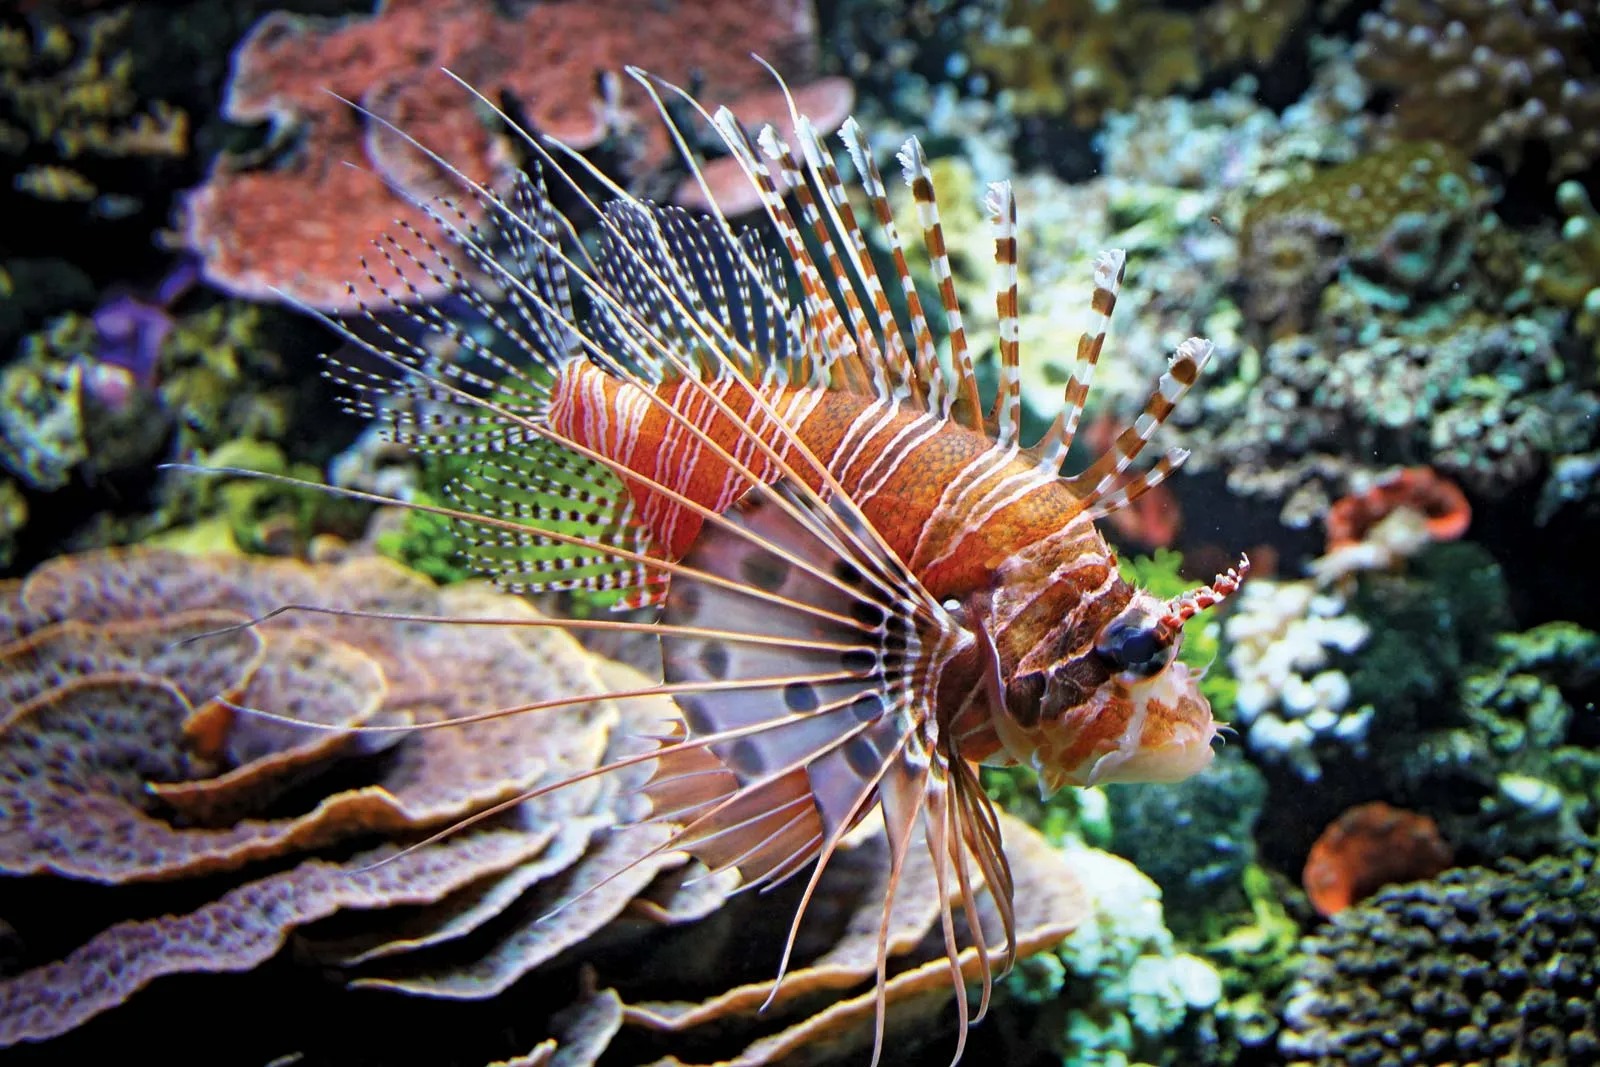 Can You Beat Your Friends in This Quiz That’s All About Animals? Red lionfish